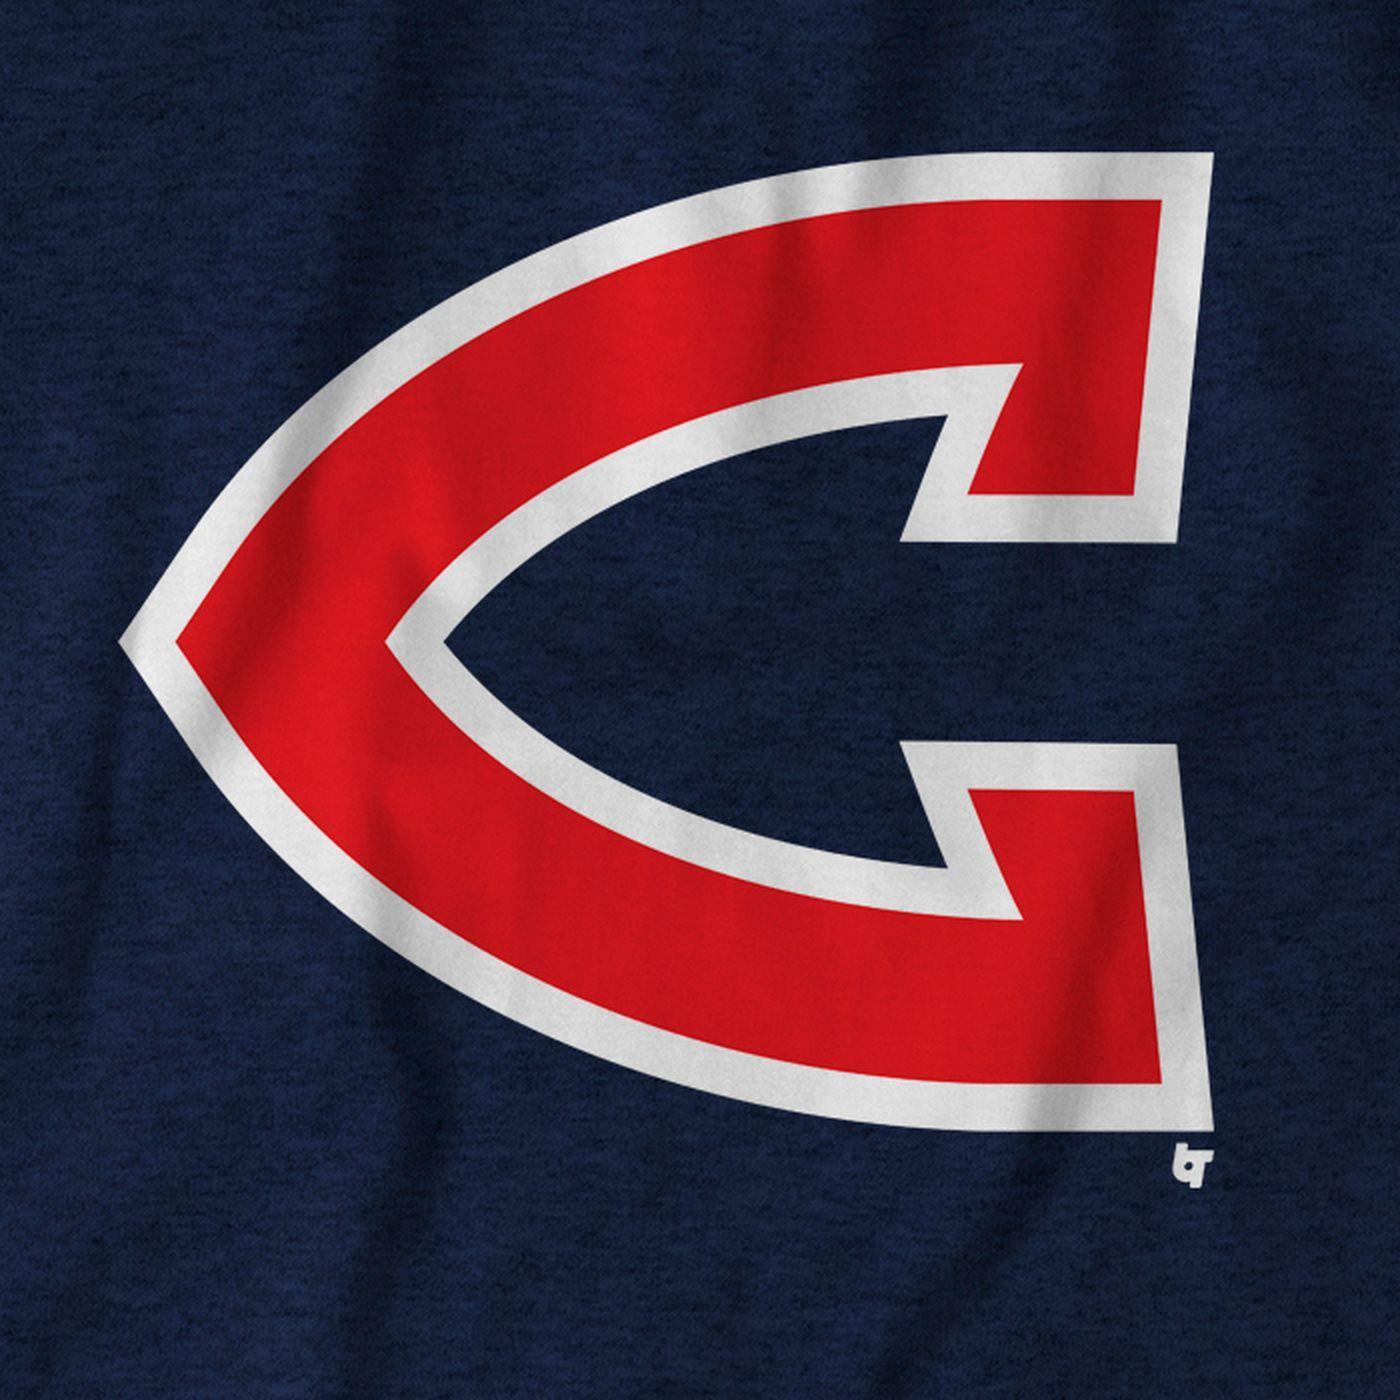 Cleveland Indians C Logo - BreakingT has a new Indians logo idea and it's kinda great - Let's ...